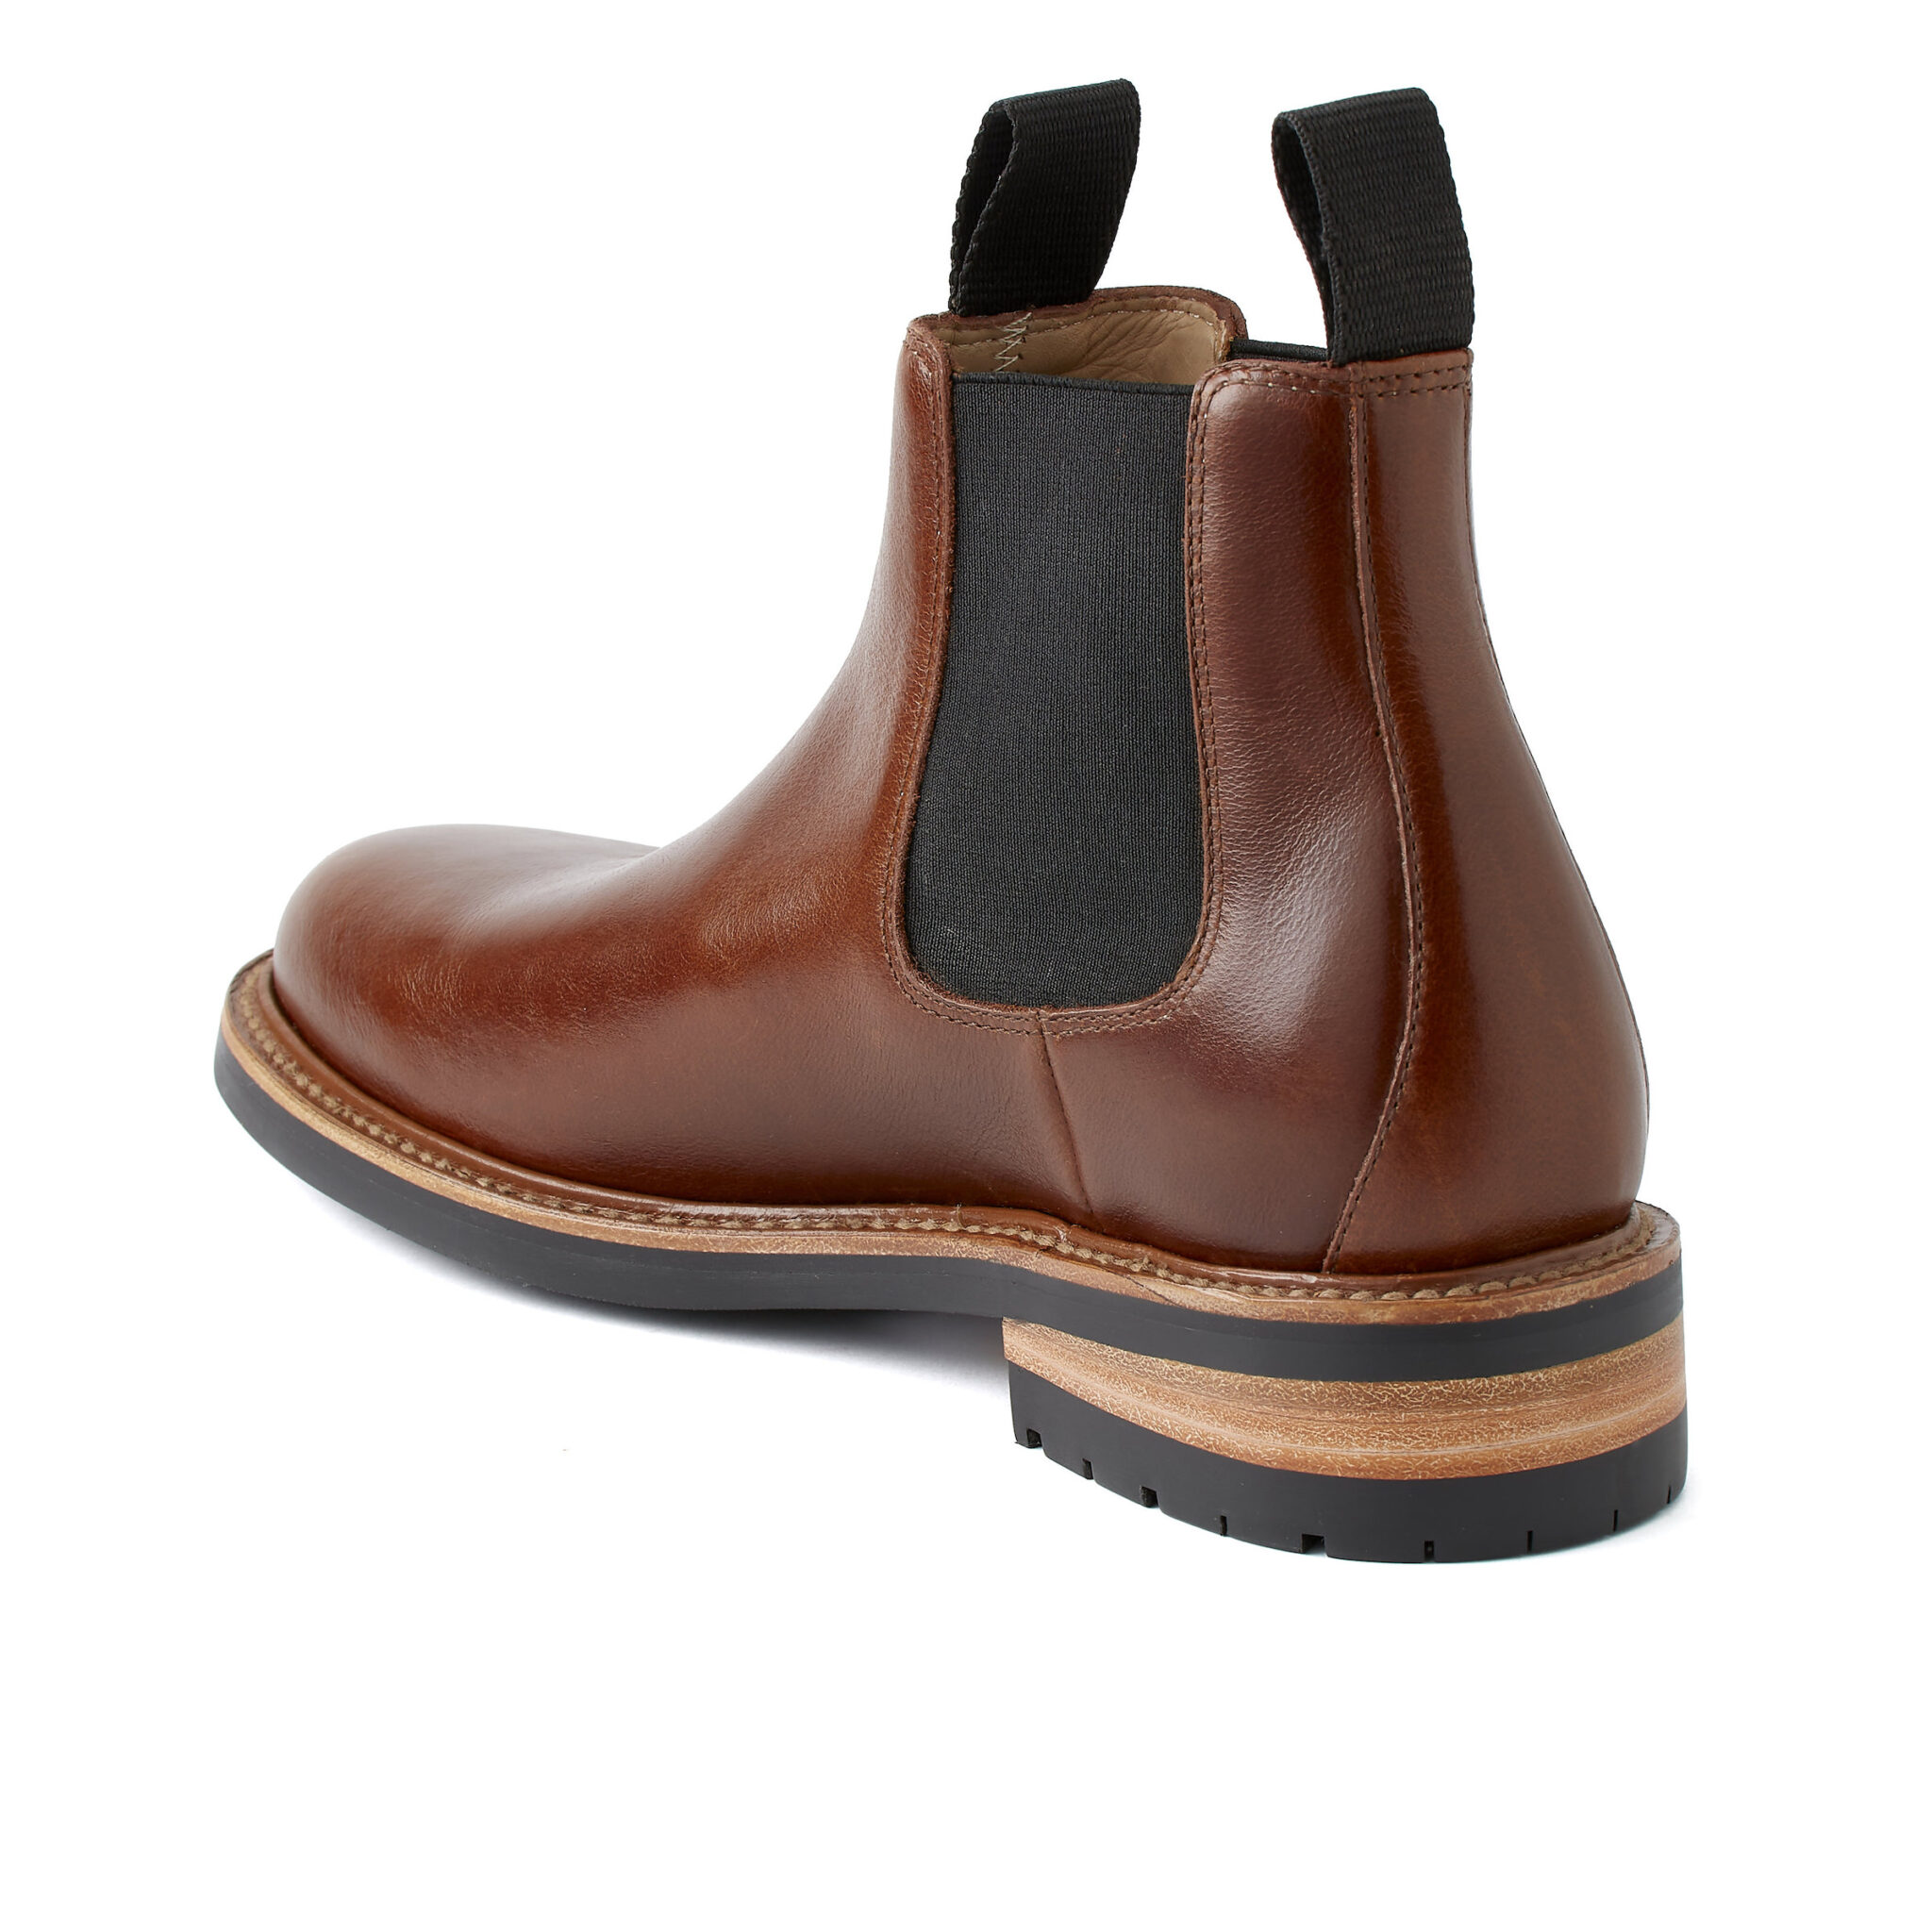 The Rhodes Cooper Boot – A Timeless Chelsea Boot With A Vibram Sole ...